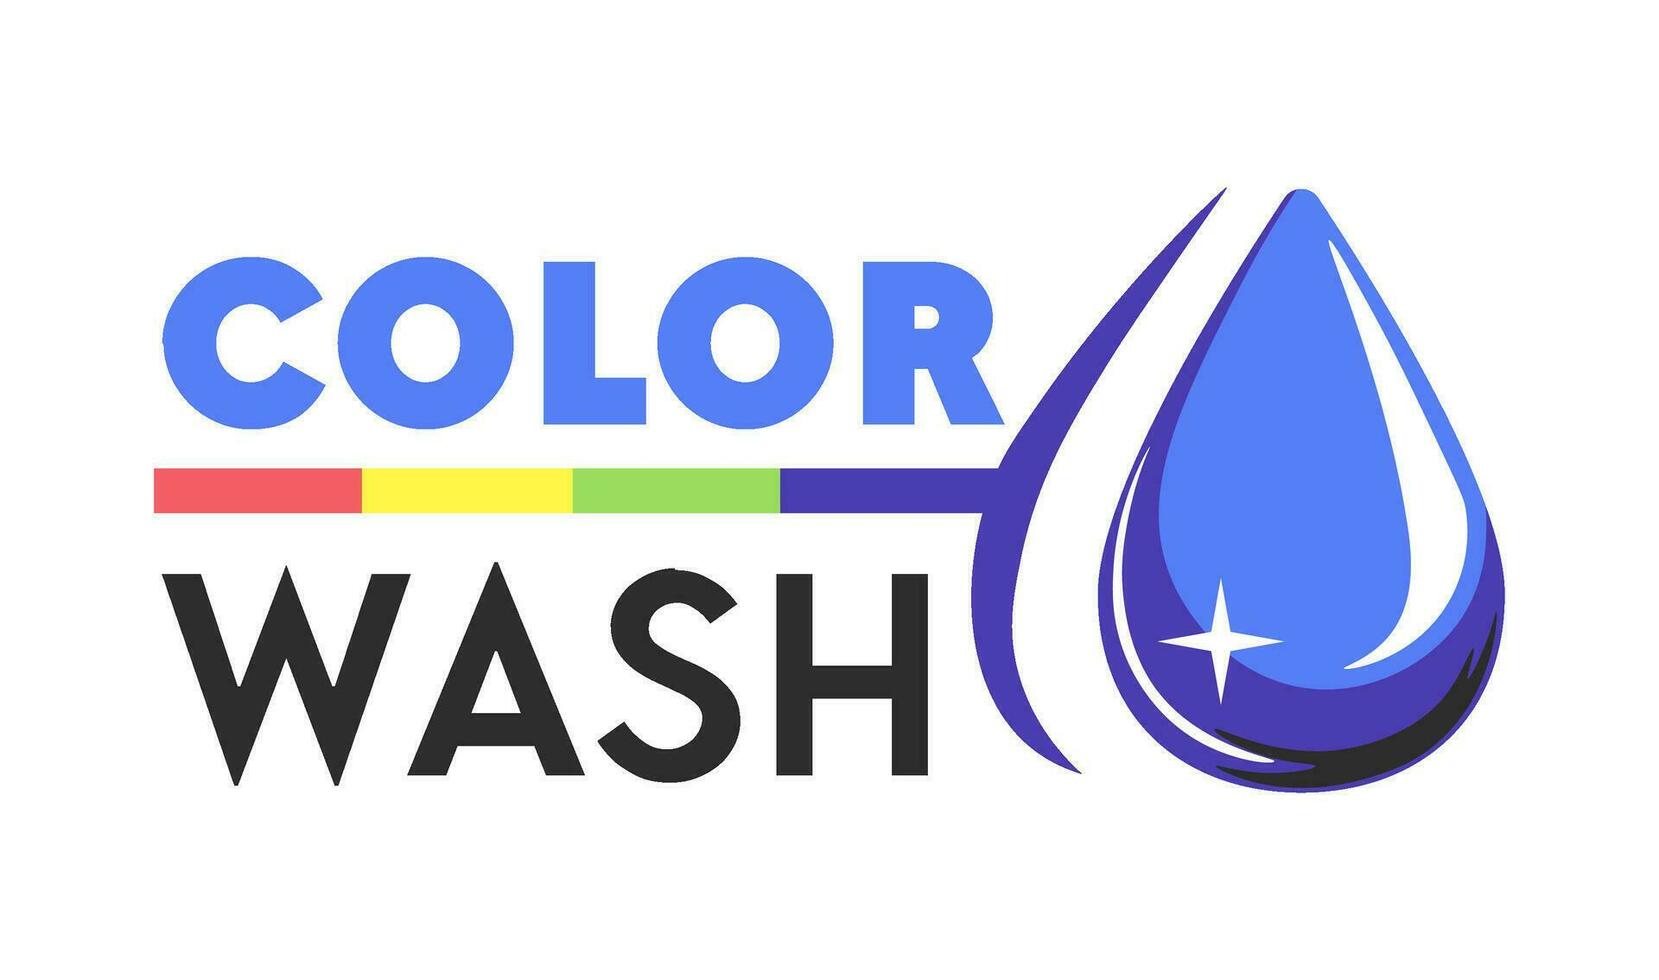 Color wash, icon with sparkling drop of water vector